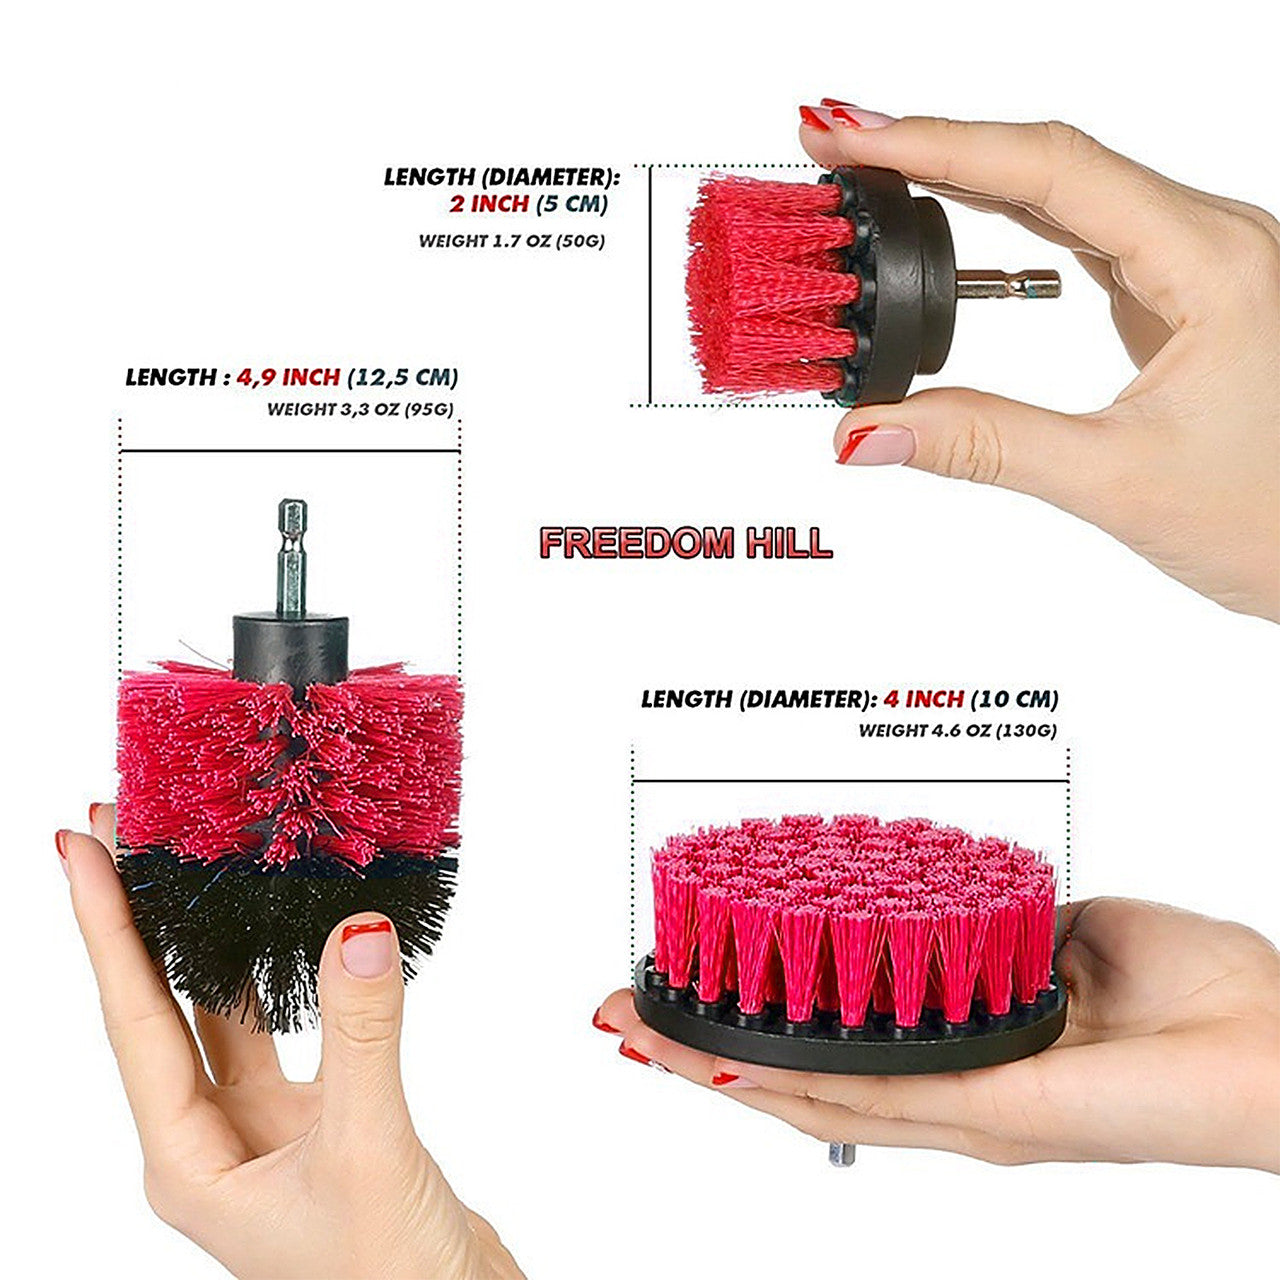 Drill Brush Attachment Set, Scrub Brush Drill Powered Car Detailing Cleaning Brush Kit - Universal for Auto, Bathroom Toilet, Grout, Floor, Shower, Tile, Sinks, Kitchen, Red, 3PCS